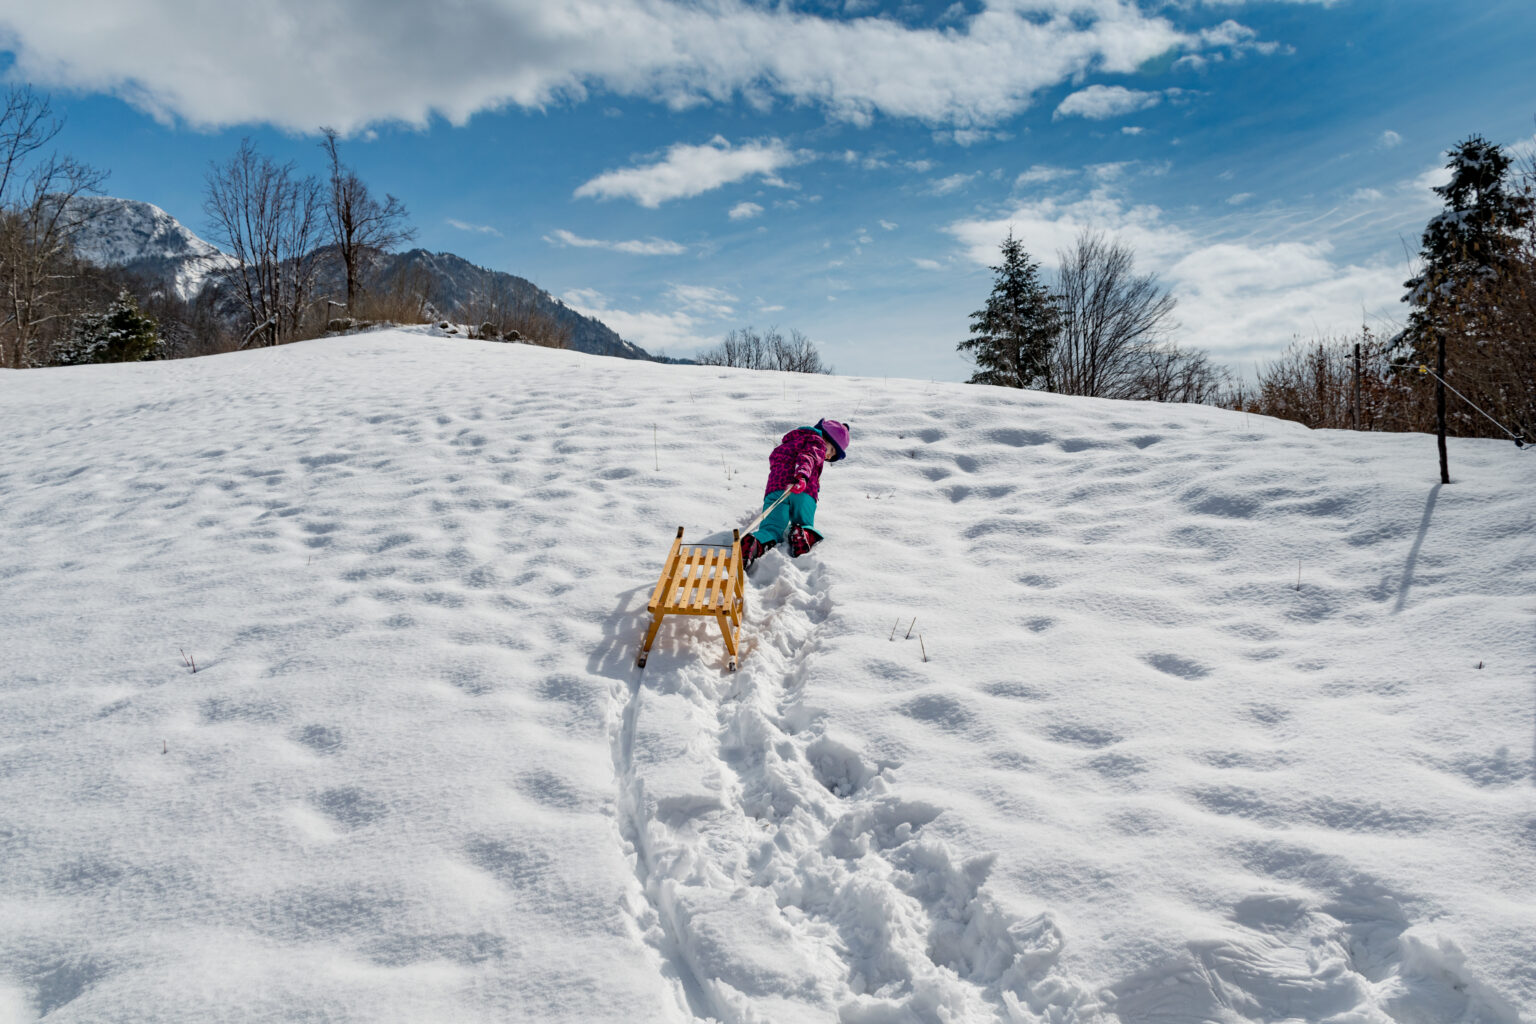 Young Girl Pulling Sled Behind Her on Snow Covered Slope.